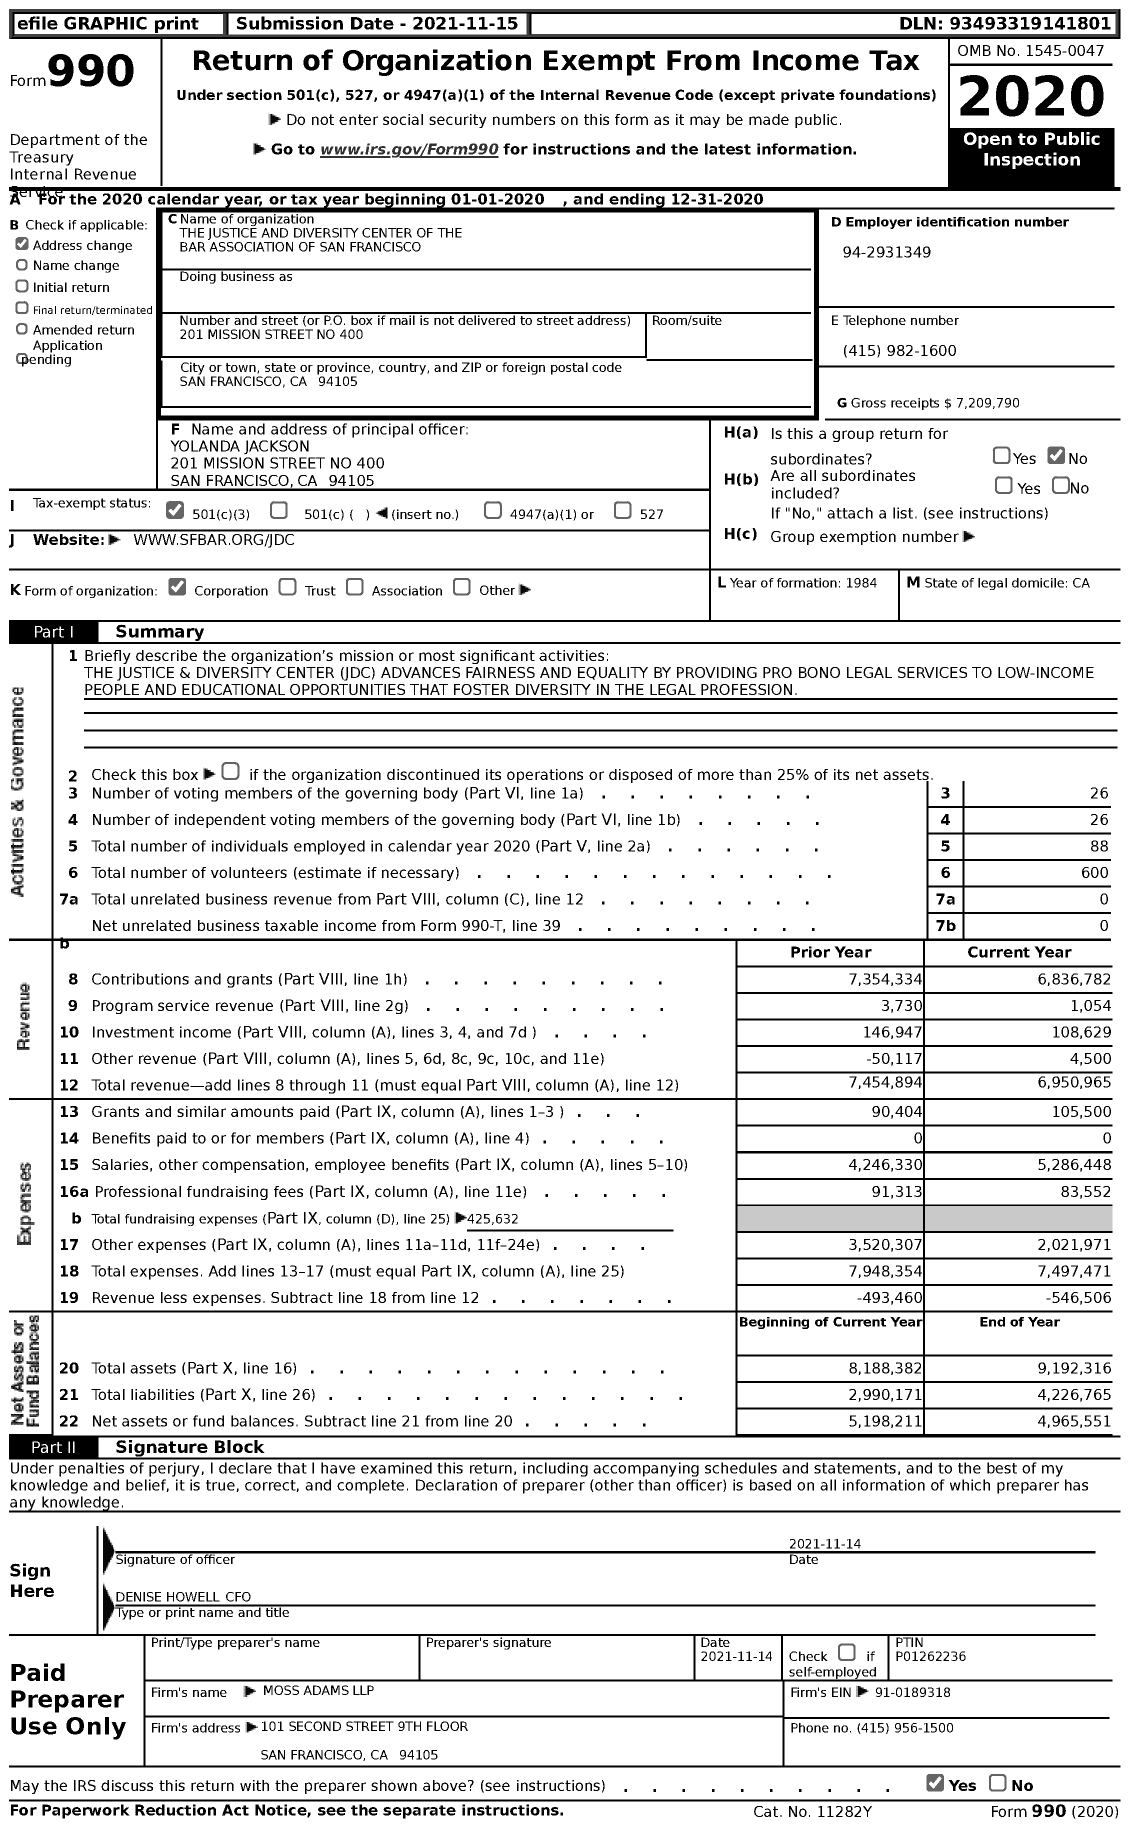 Image of first page of 2020 Form 990 for the Justice and Diversity Center of the Bar Association of San Francisco (JDC)